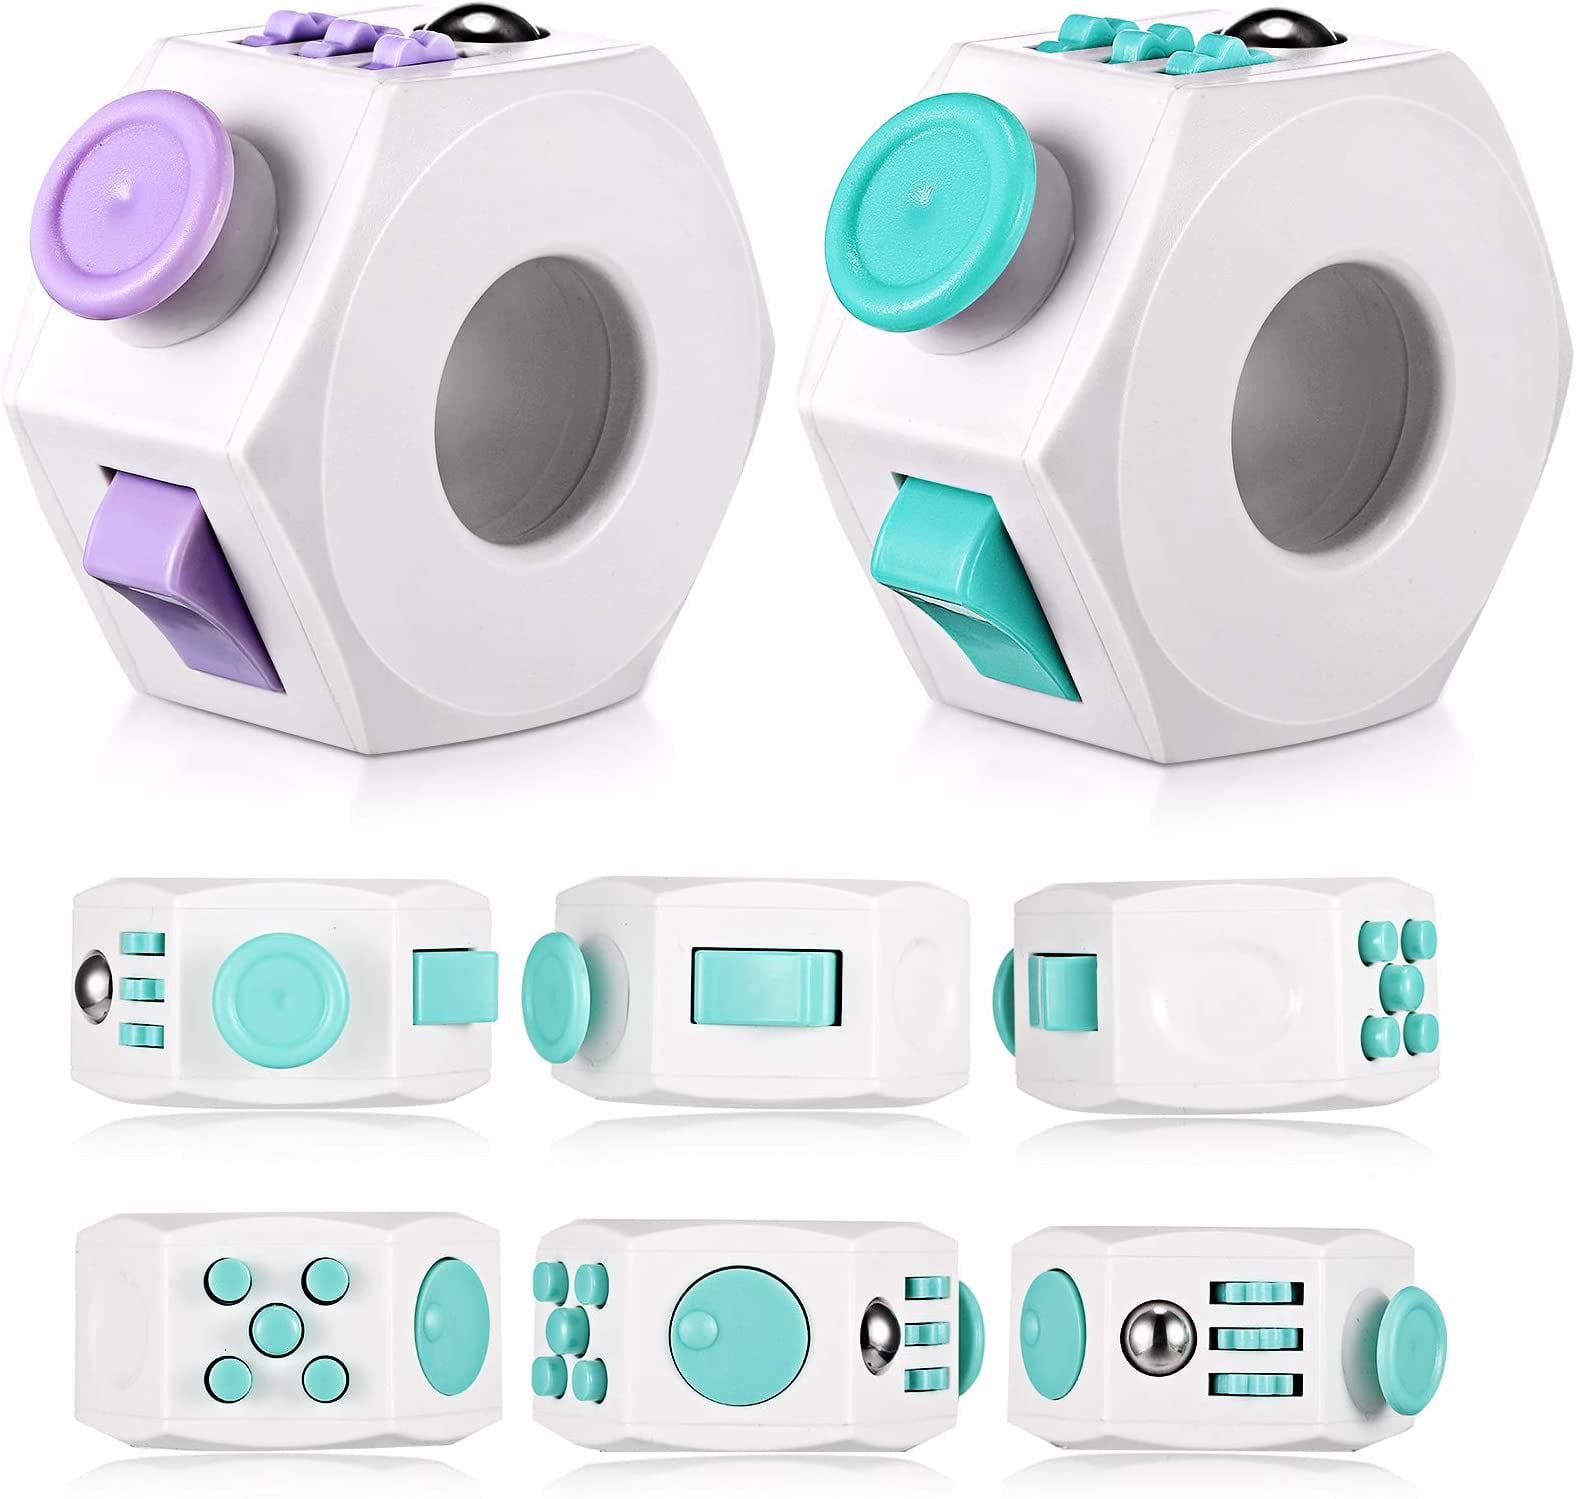 Green/Purple 2 Pieces Anti-Anxiety Decompression Ring Plastic Fidget Sensory Cube Toy to Relieve Stress and Depression Calming Focus for Teens and Adults with ADHD ADD OCD Autism